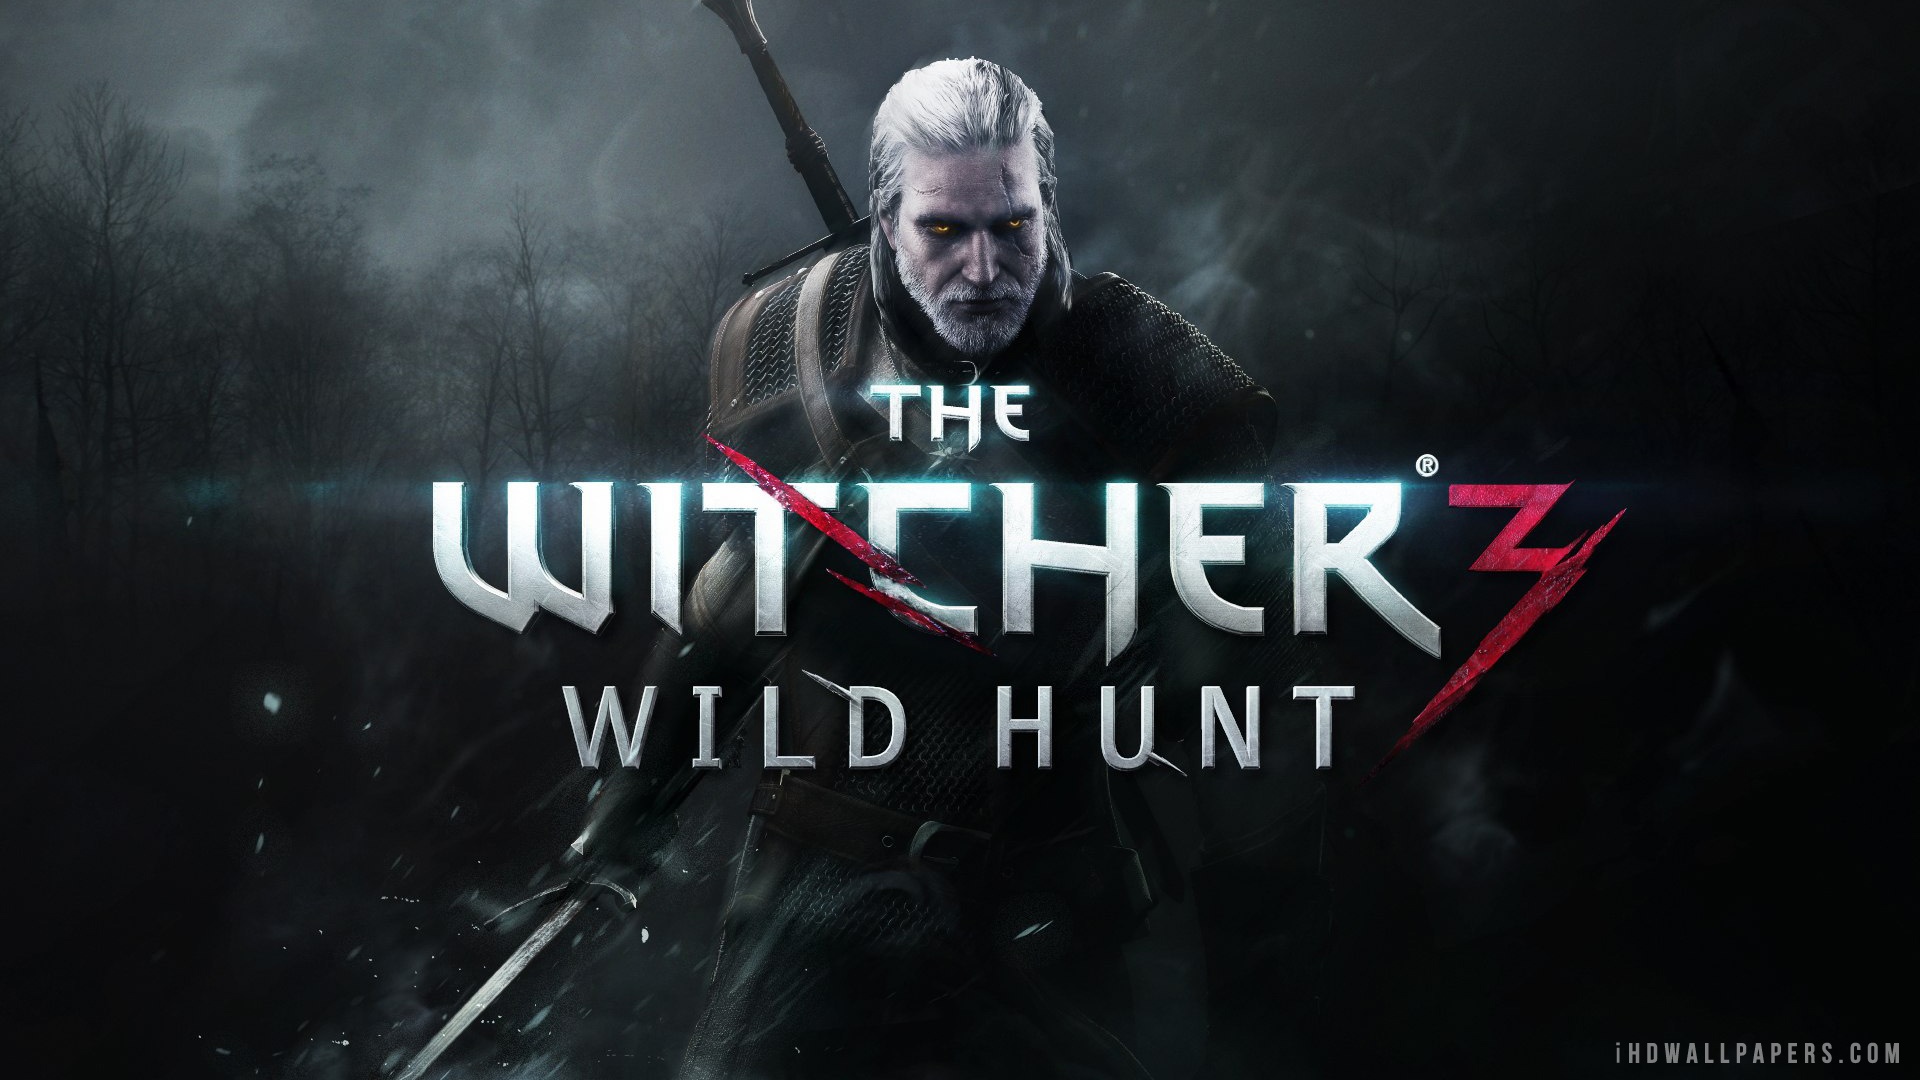  The Witcher Wild Hunt HD Wallpaper iHD Wallpapers